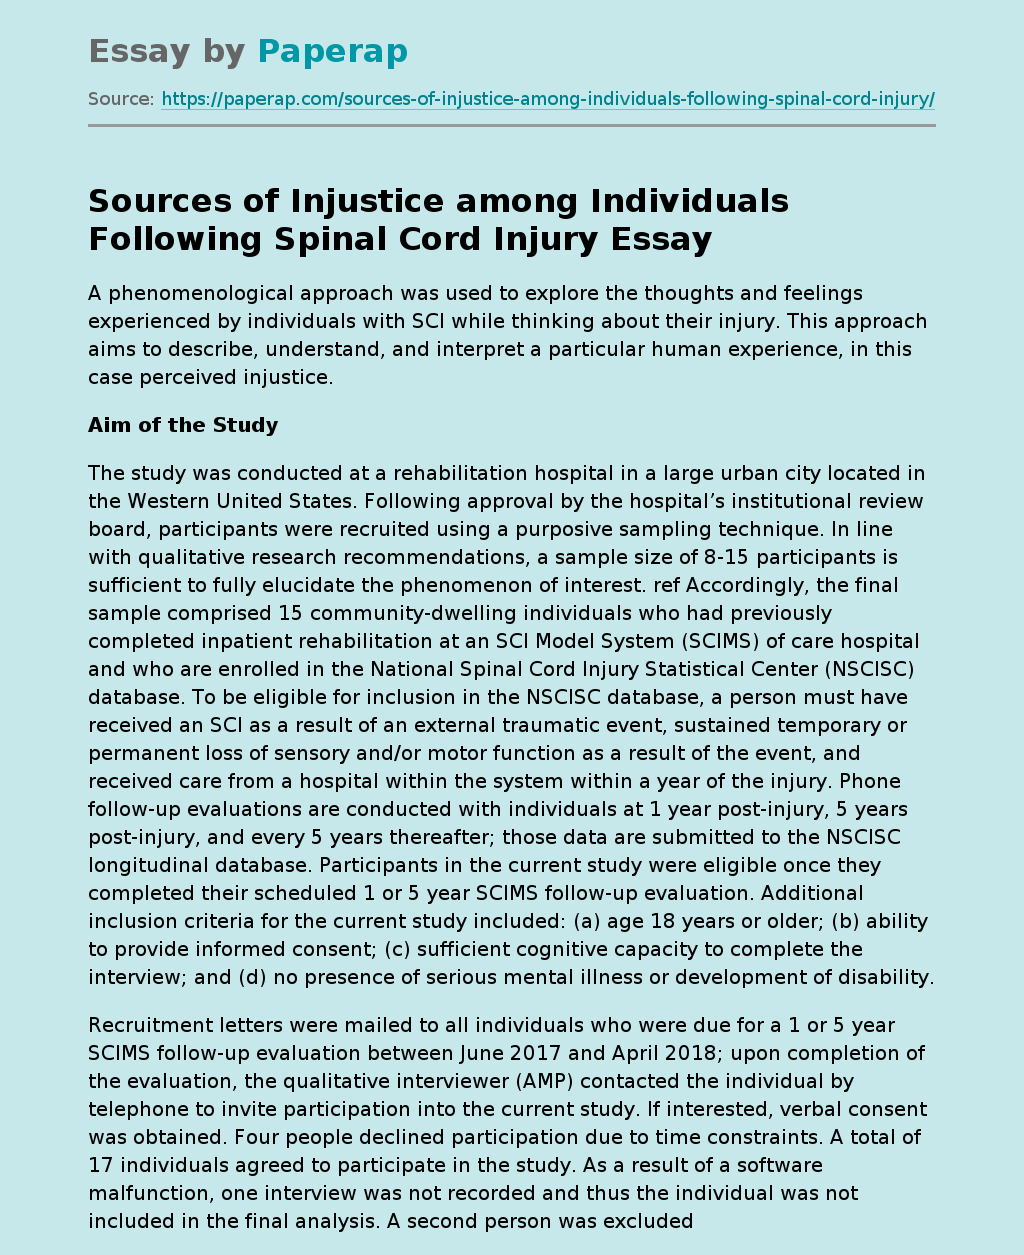 Sources of Injustice among Individuals Following Spinal Cord Injury